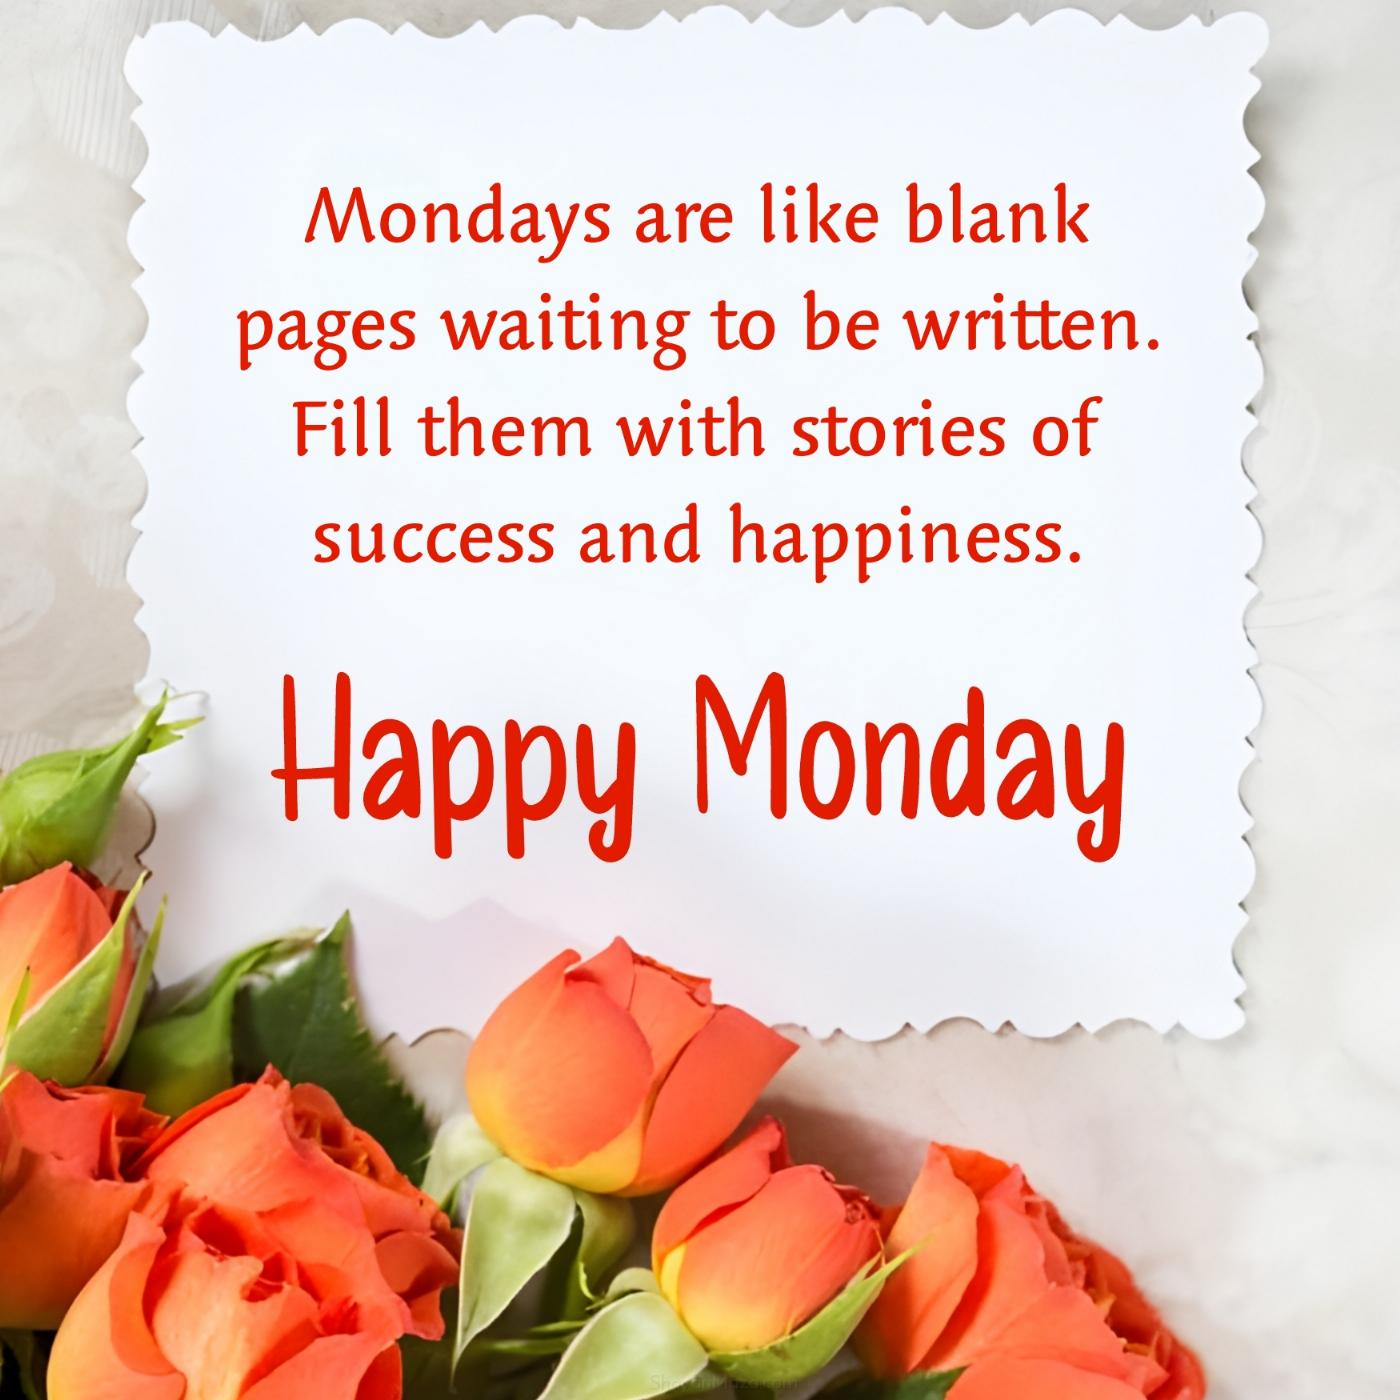 Mondays are like blank pages waiting to be written